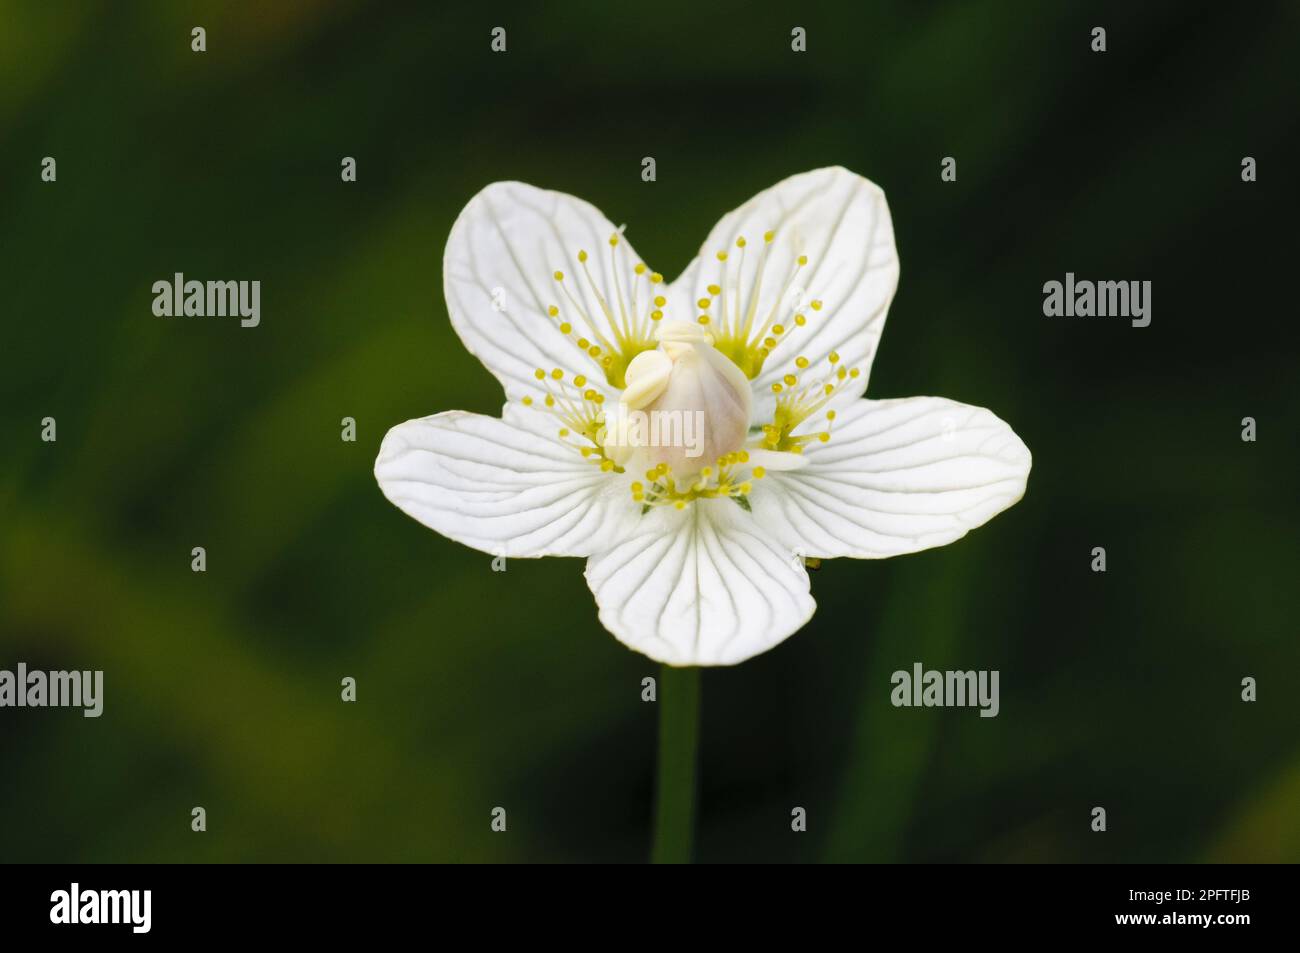 Marsh heartleaf, marsh grass-of-parnassus (Parnassia palustris), spindle tree family, Grass of Parnassus close-up of flower, growing on banks of Stock Photo